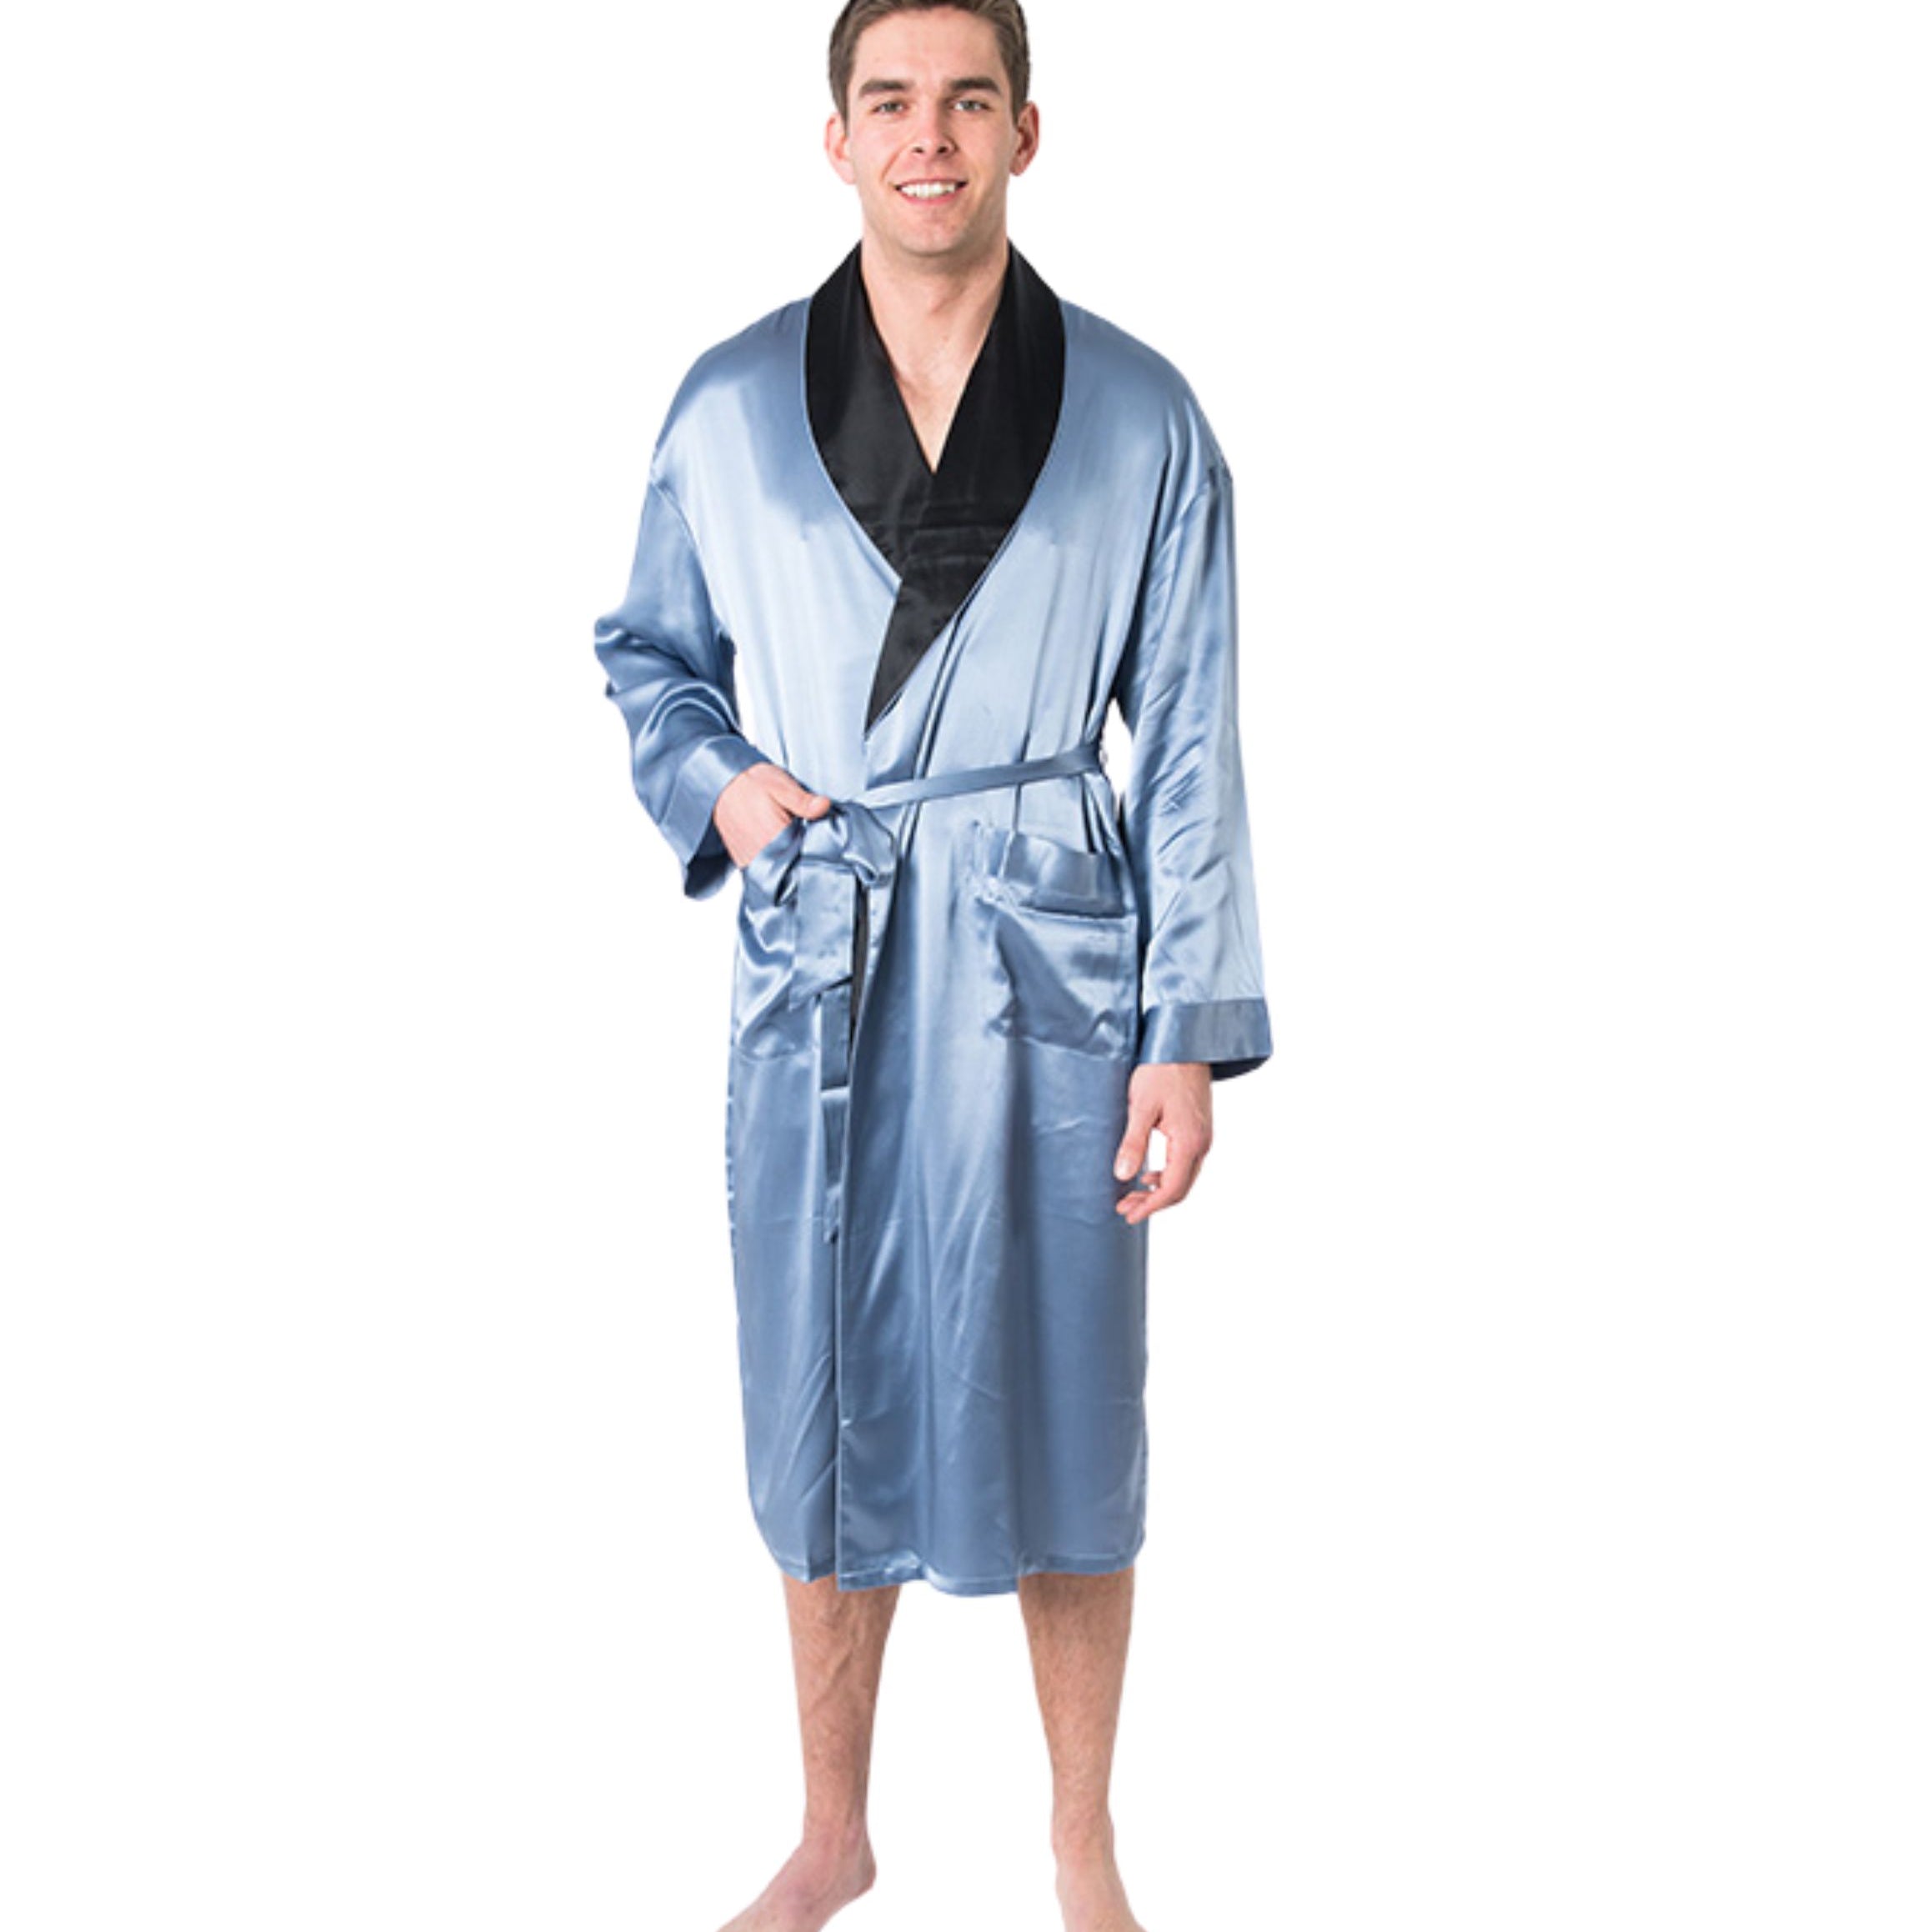  Men's Twilight Blue Robe with Black Collar - Men's Twilight Blue Robe with Black Collar -  -  - Luxurious Fine Silk by Forsters Finery